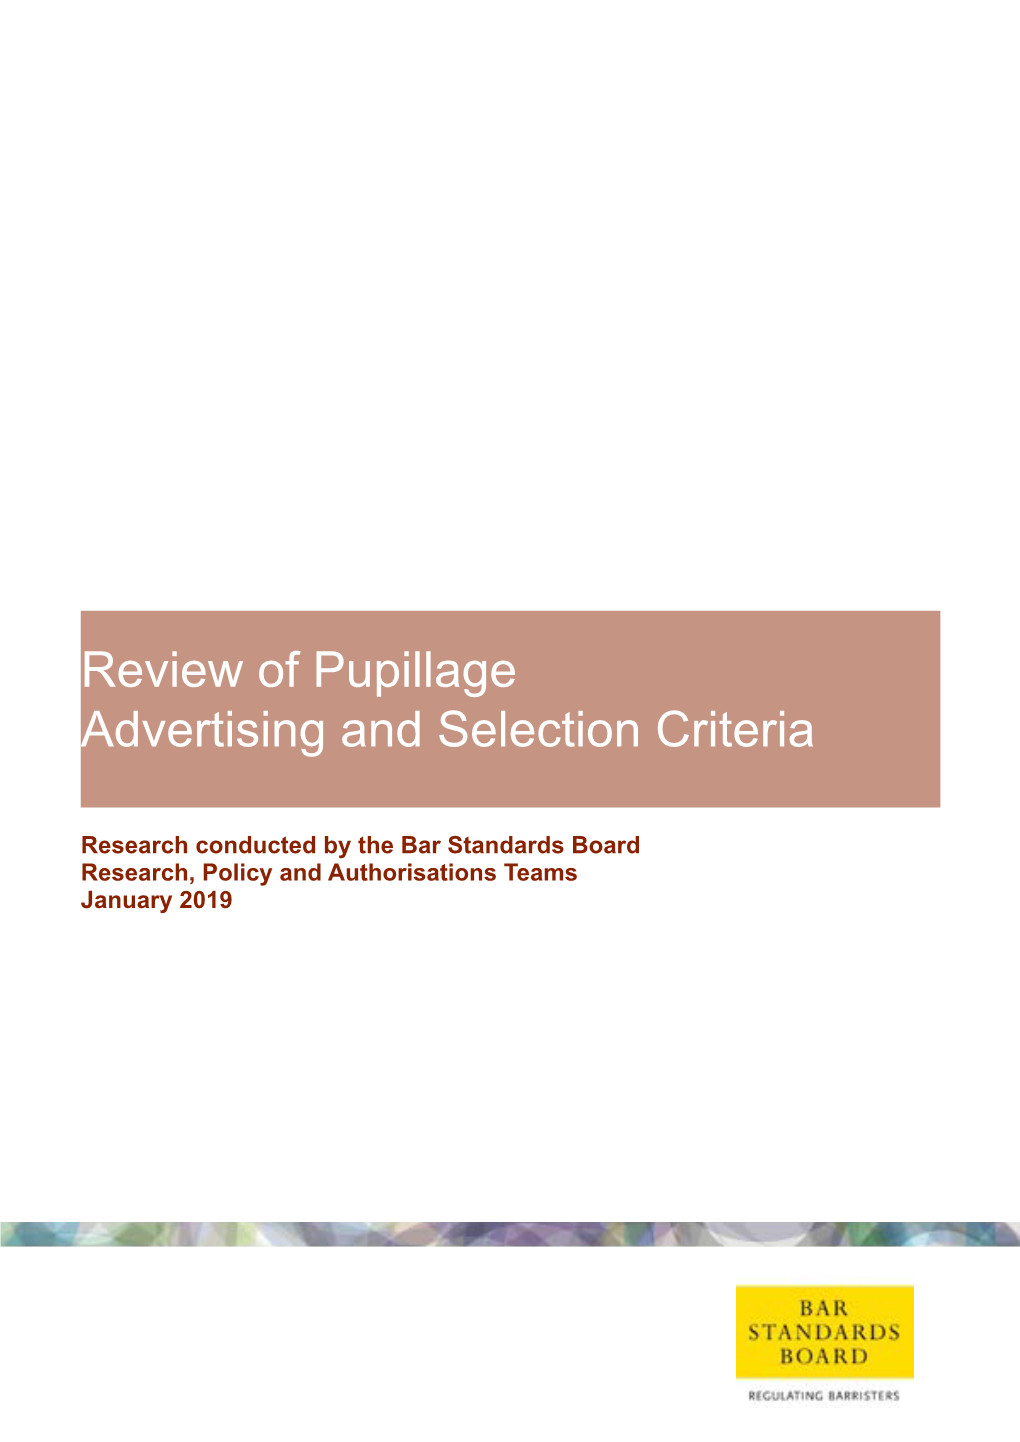 Review of Pupillage Advertising and Selection Criteria